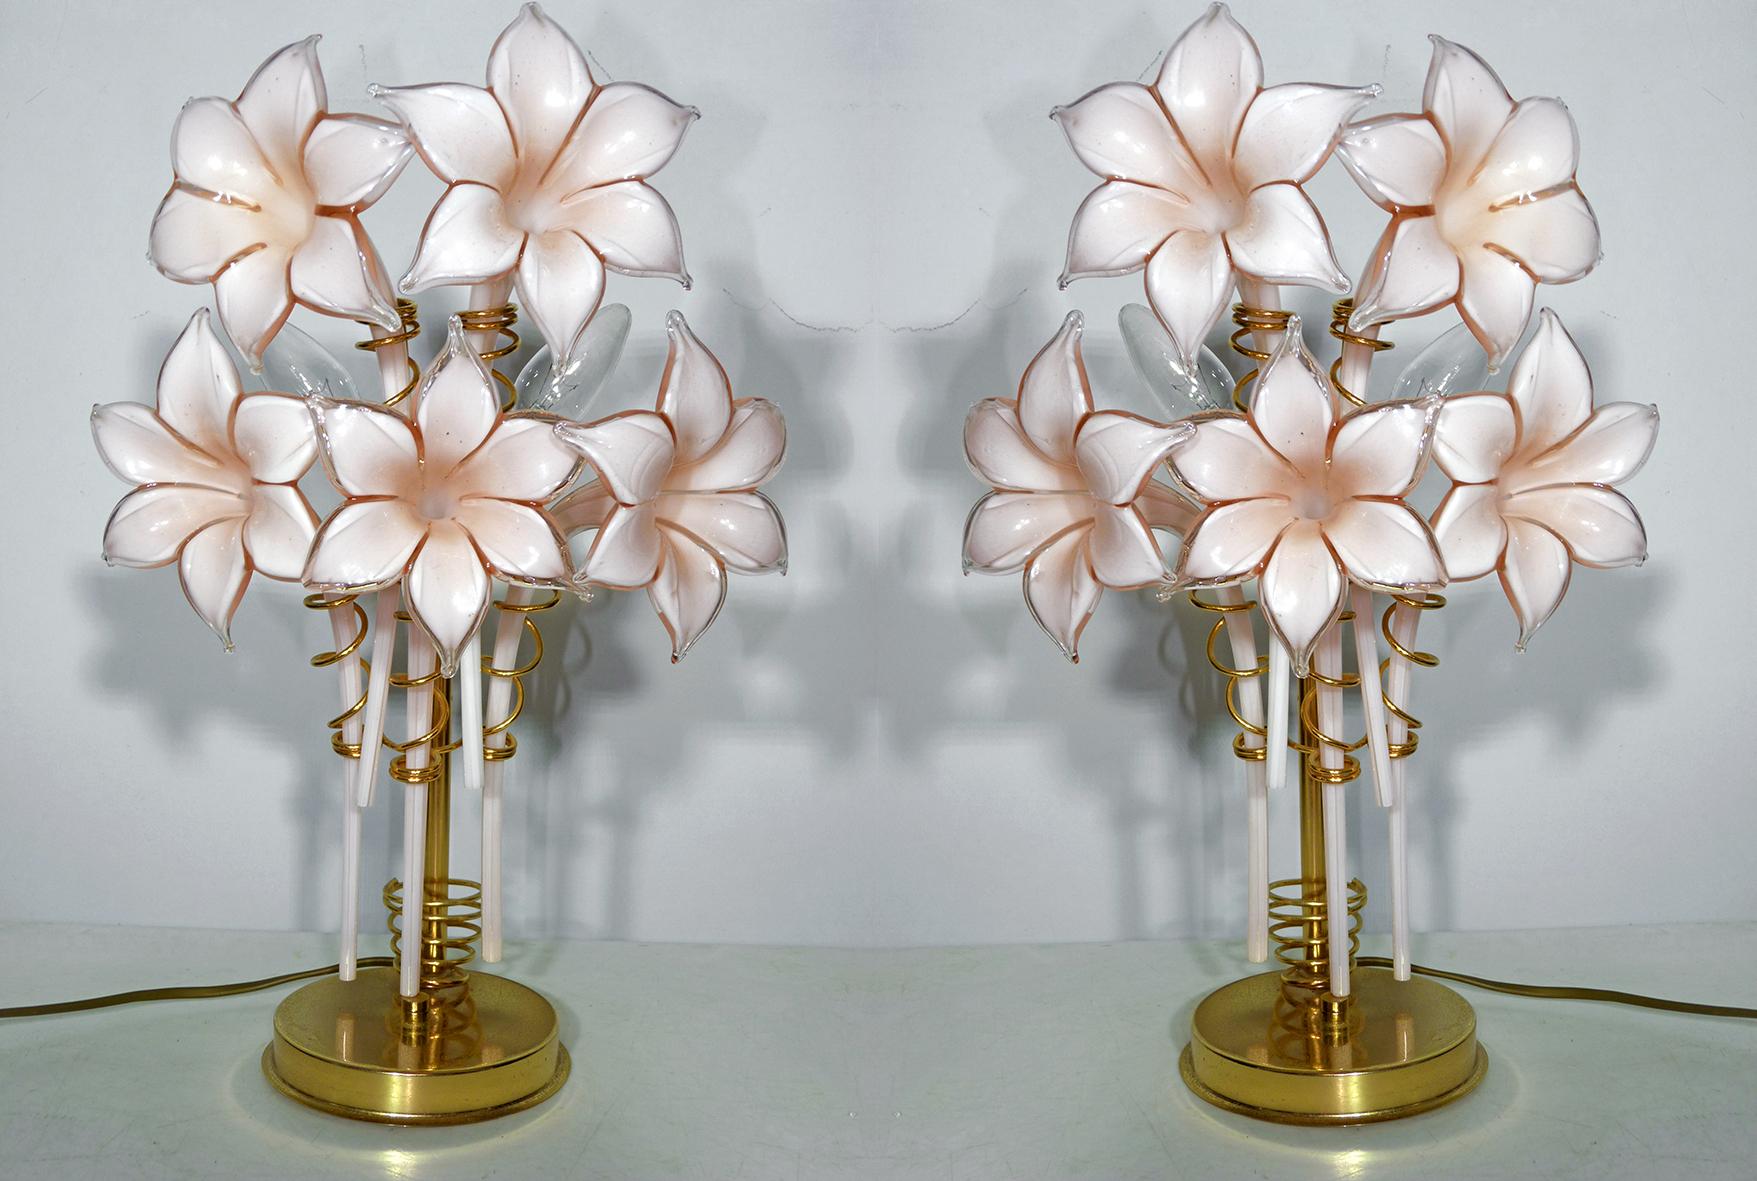 Awesome pair of 1970s vintage floral Franco Luce Seguso gilt table lamps of Murano glass, having a frame of brass,
it's spherical center holds ten hand blown, blooms in the form of lilies and gold-plated brass.
Measures:
Depth 10 in/ 25 cm
Width